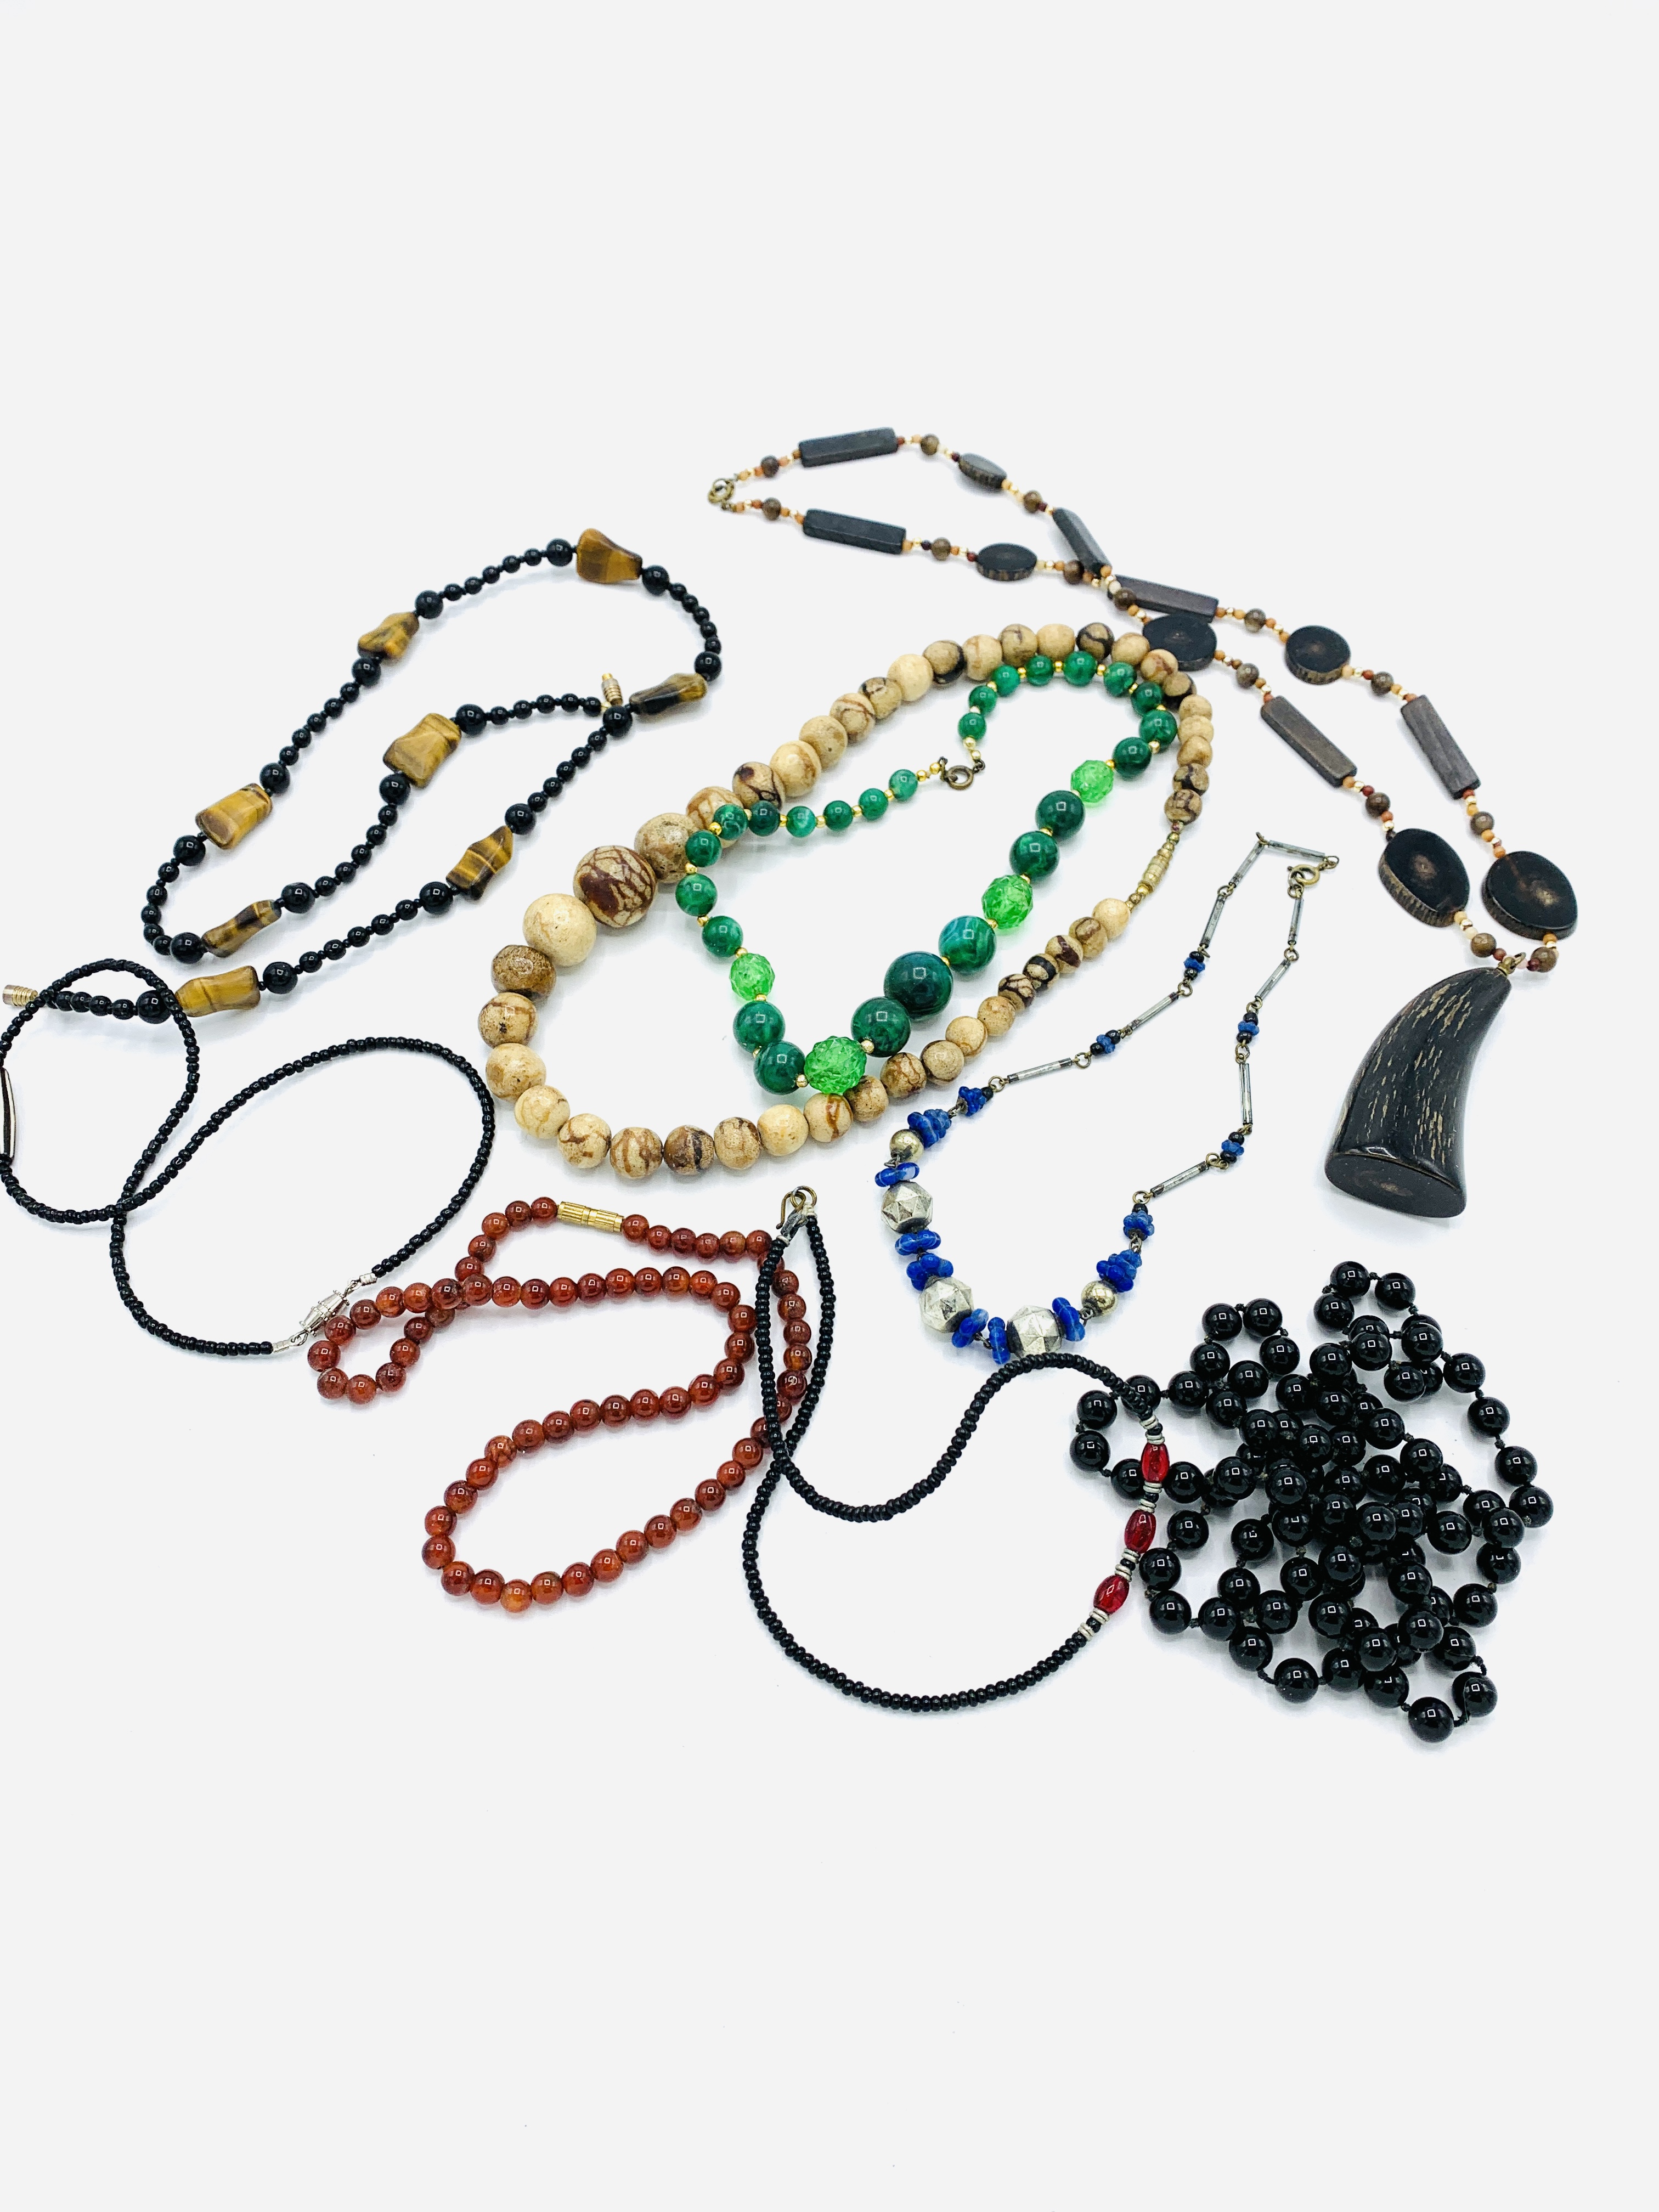 Nine various bead necklaces